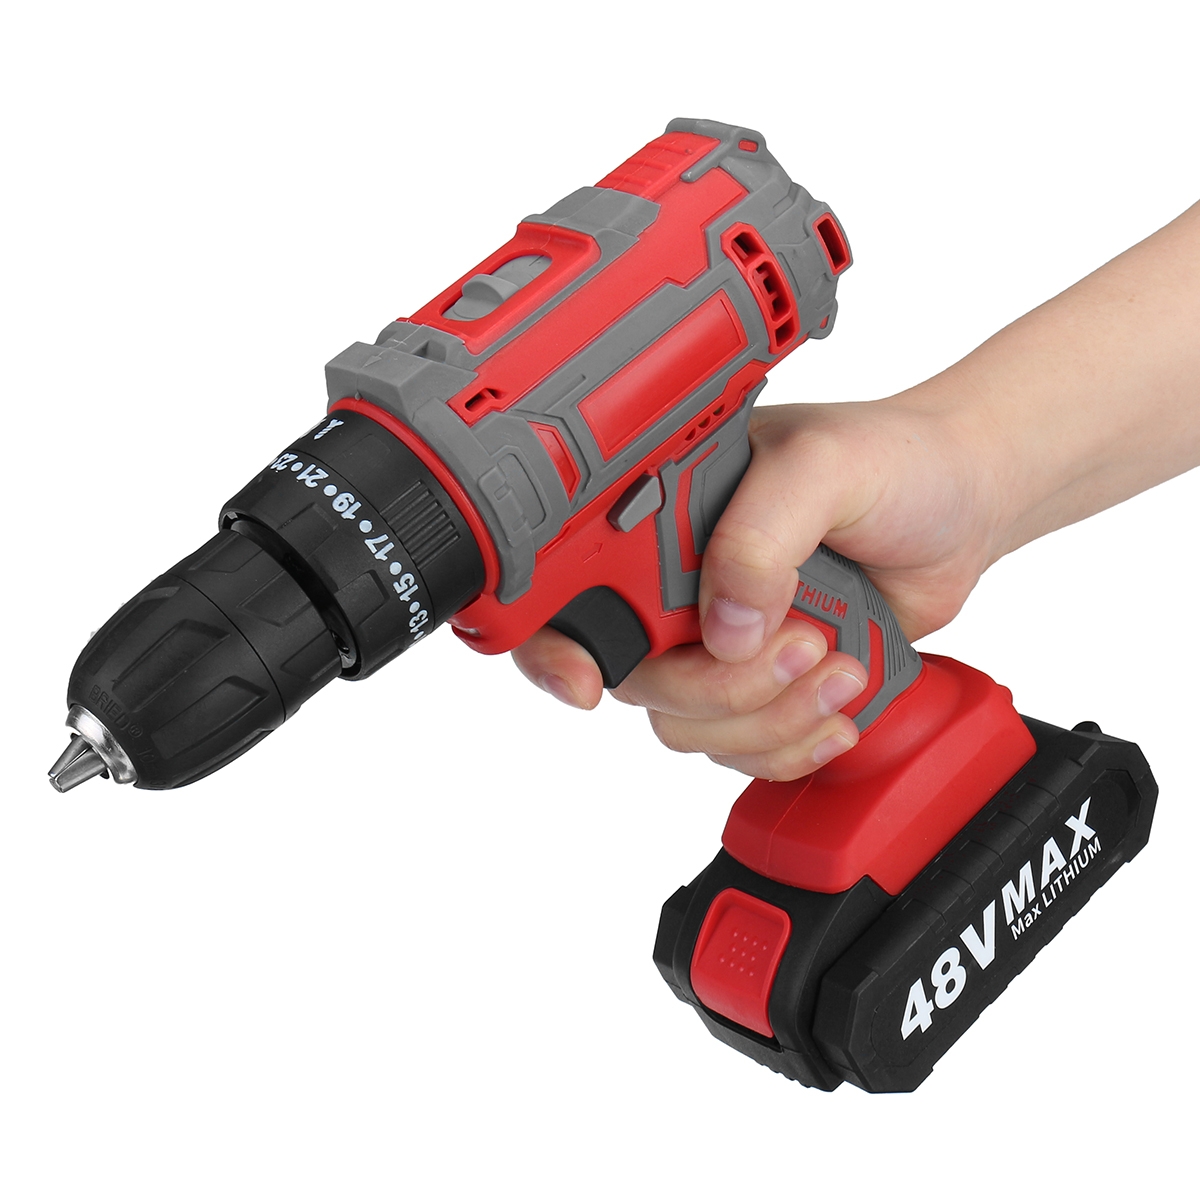 48V-Cordless-Electric-Drill-Tool-Kits-Rechargeable-Dual-Speed-3-Stages-Power-Drill-W-1pc-or-2pcs-Bat-1784738-2